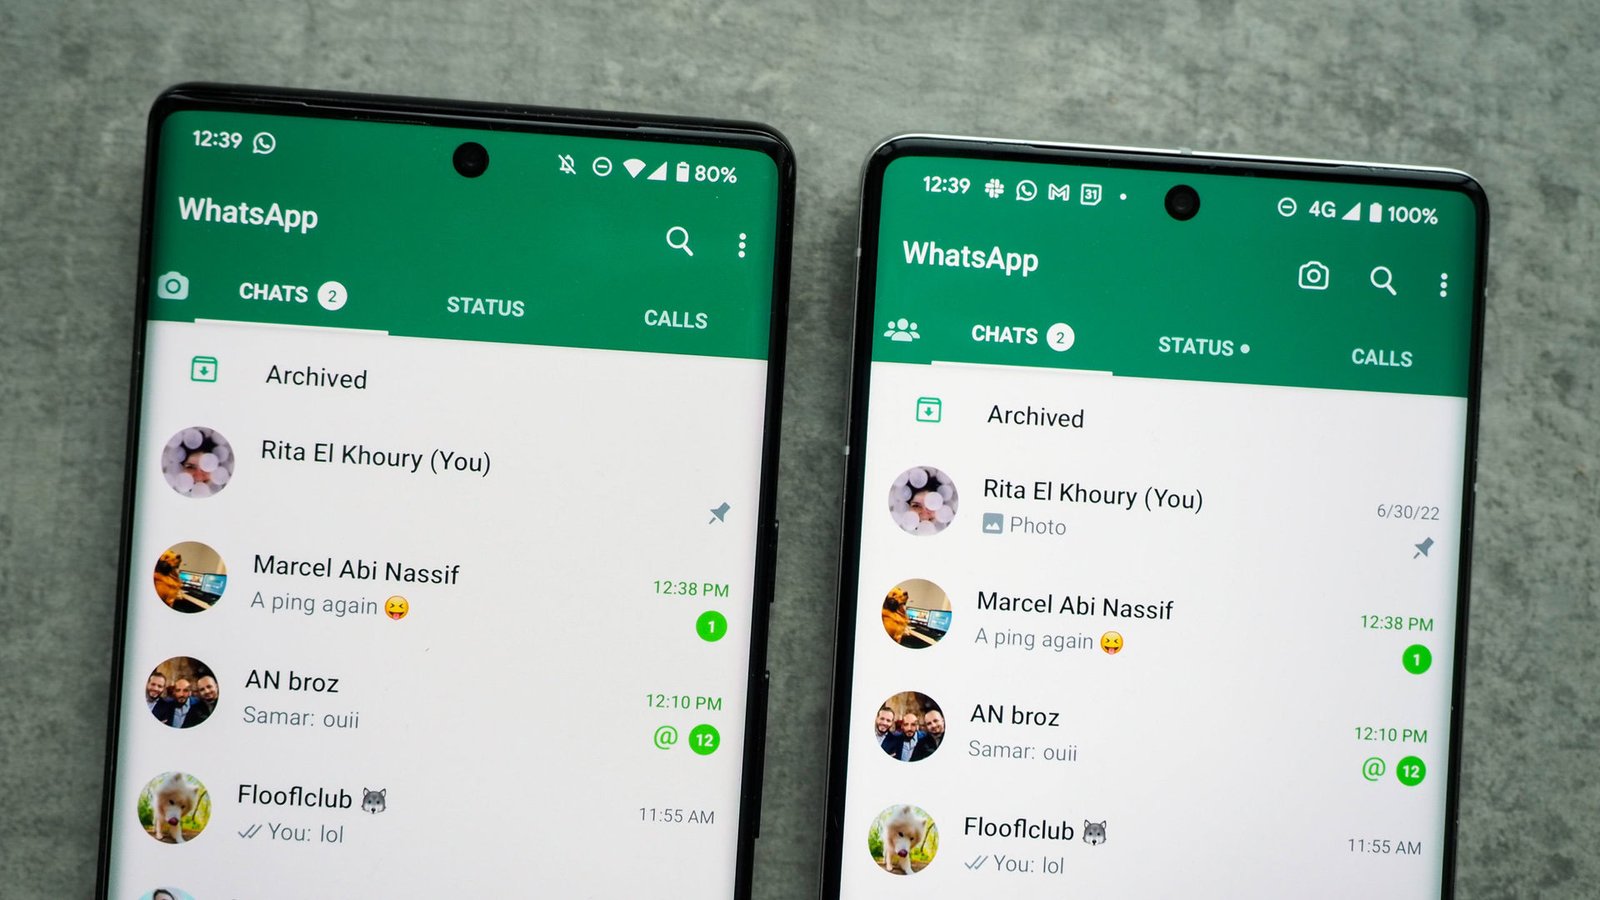 Favorites first: WhatsApp will soon rank your contacts’ status updates